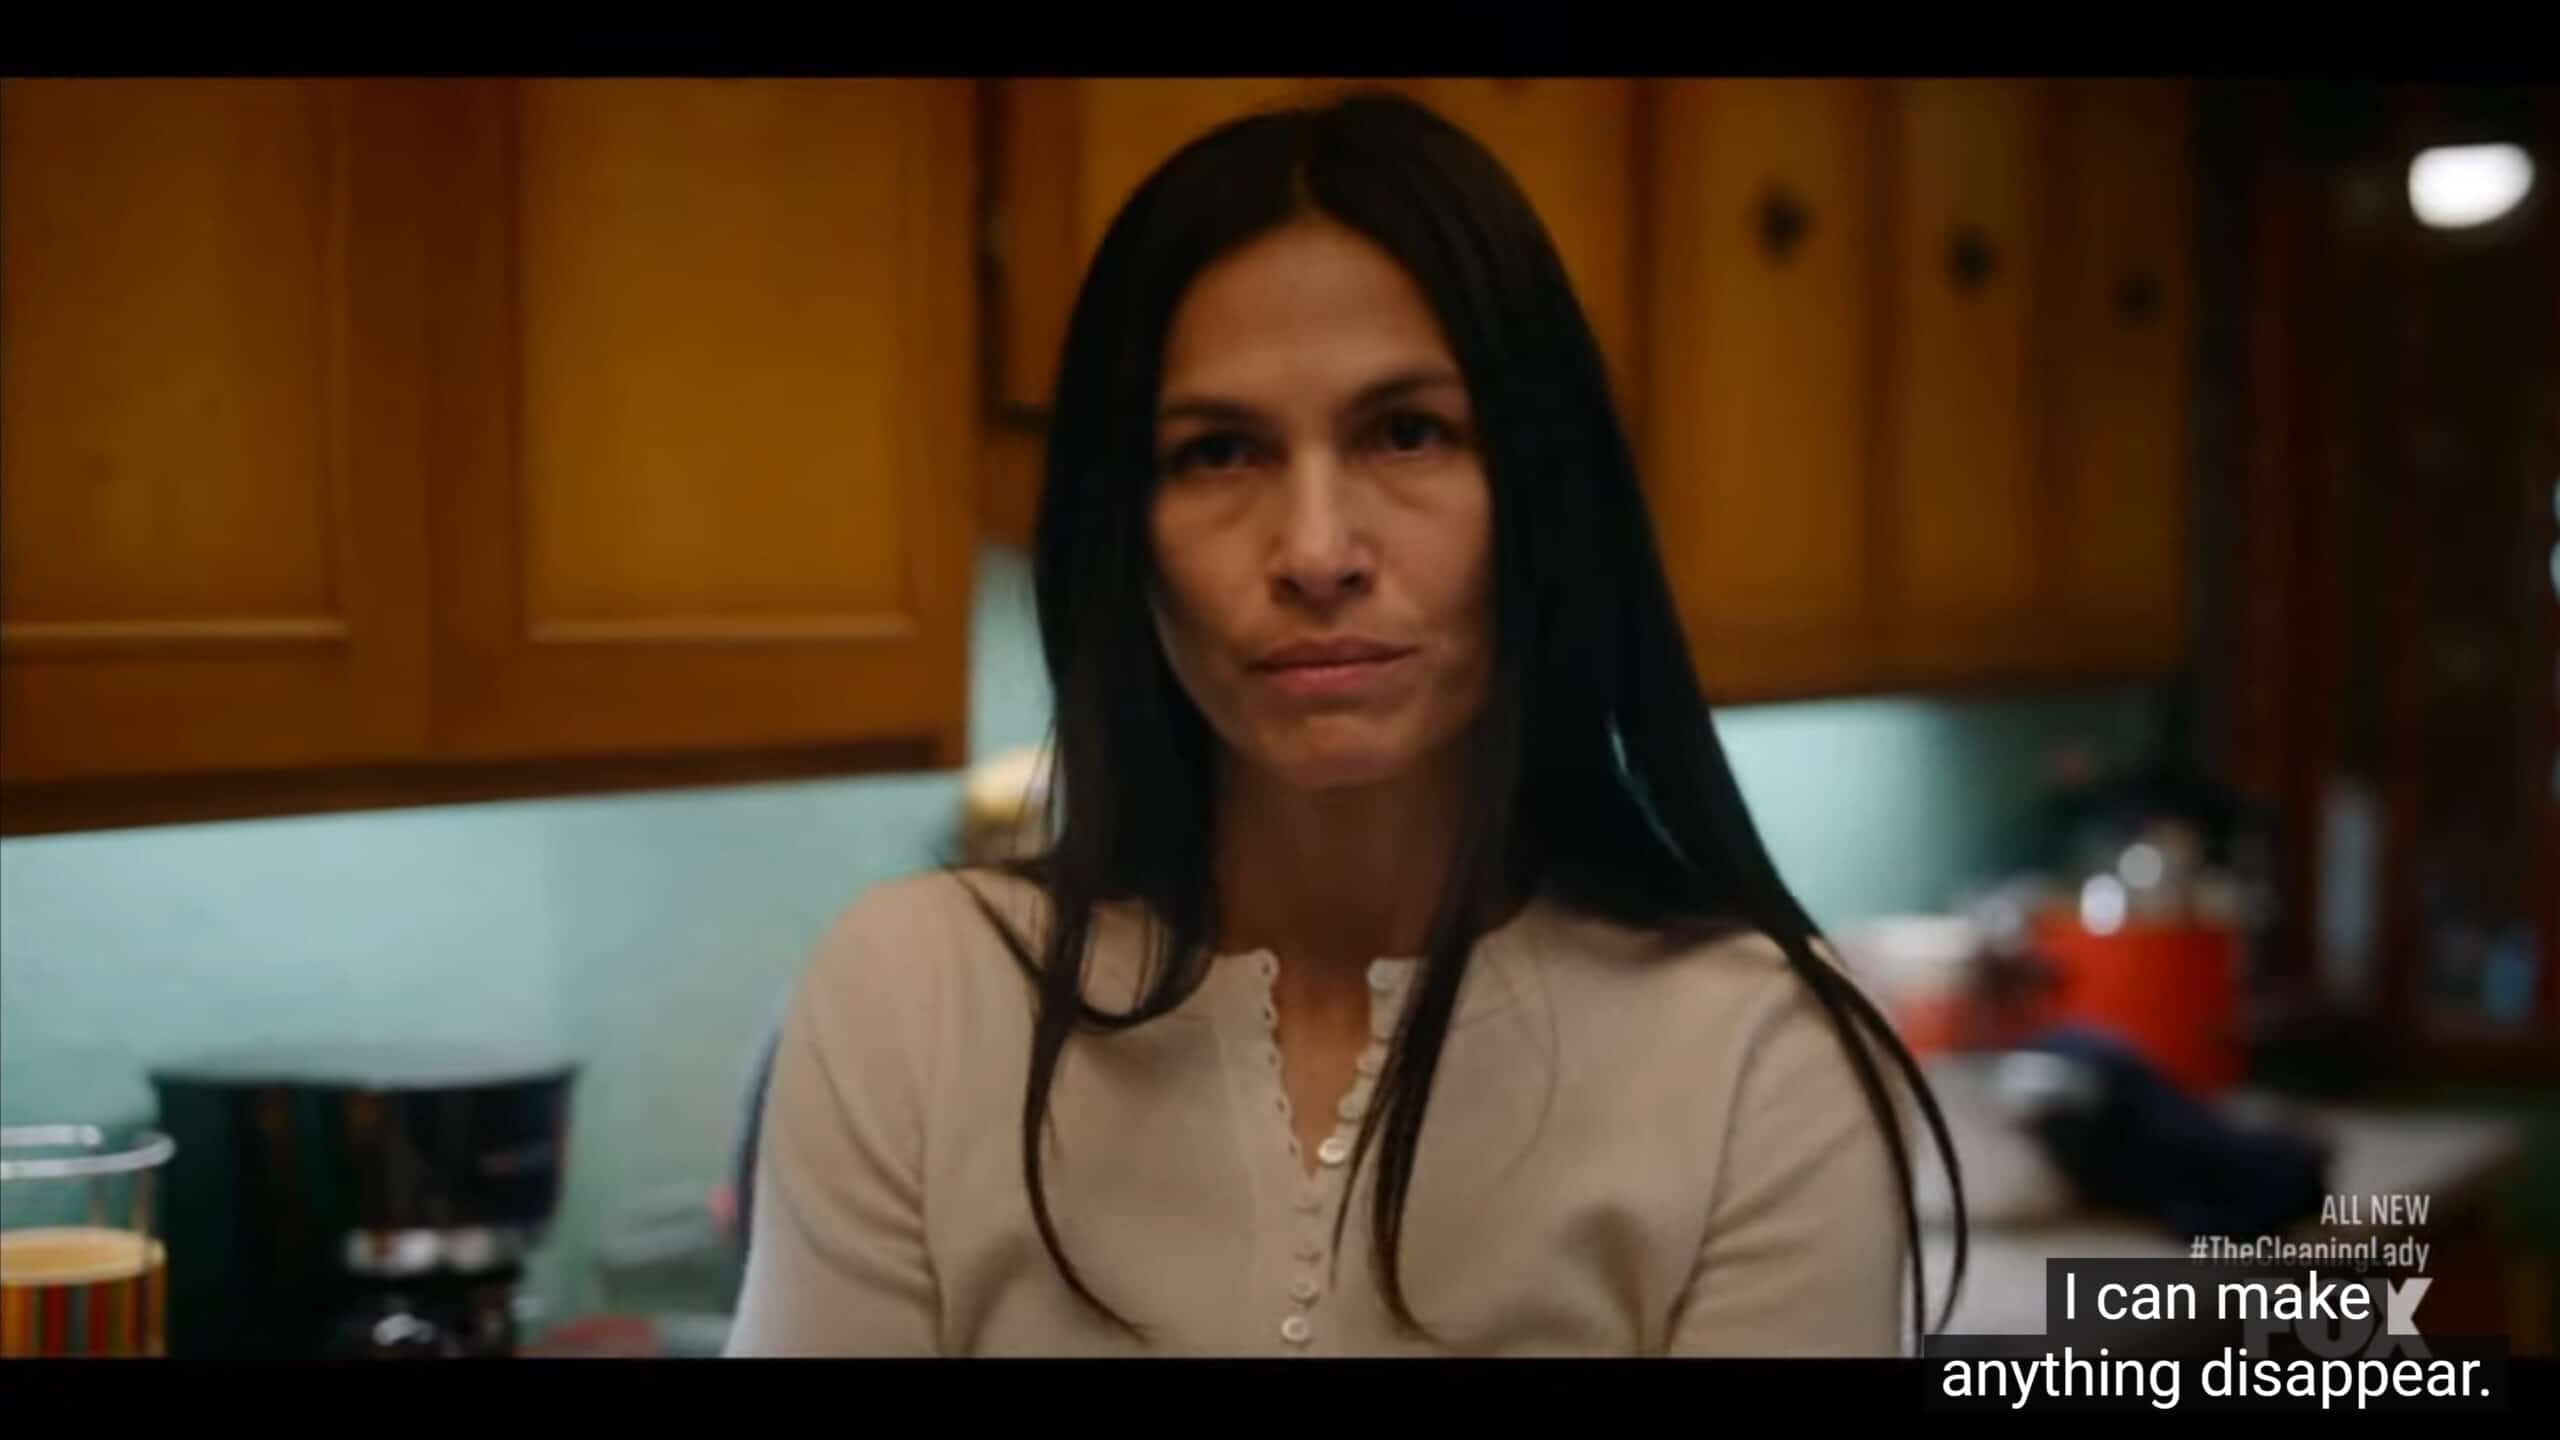 Thony (Elodie Yung) noting she can make anything disappear